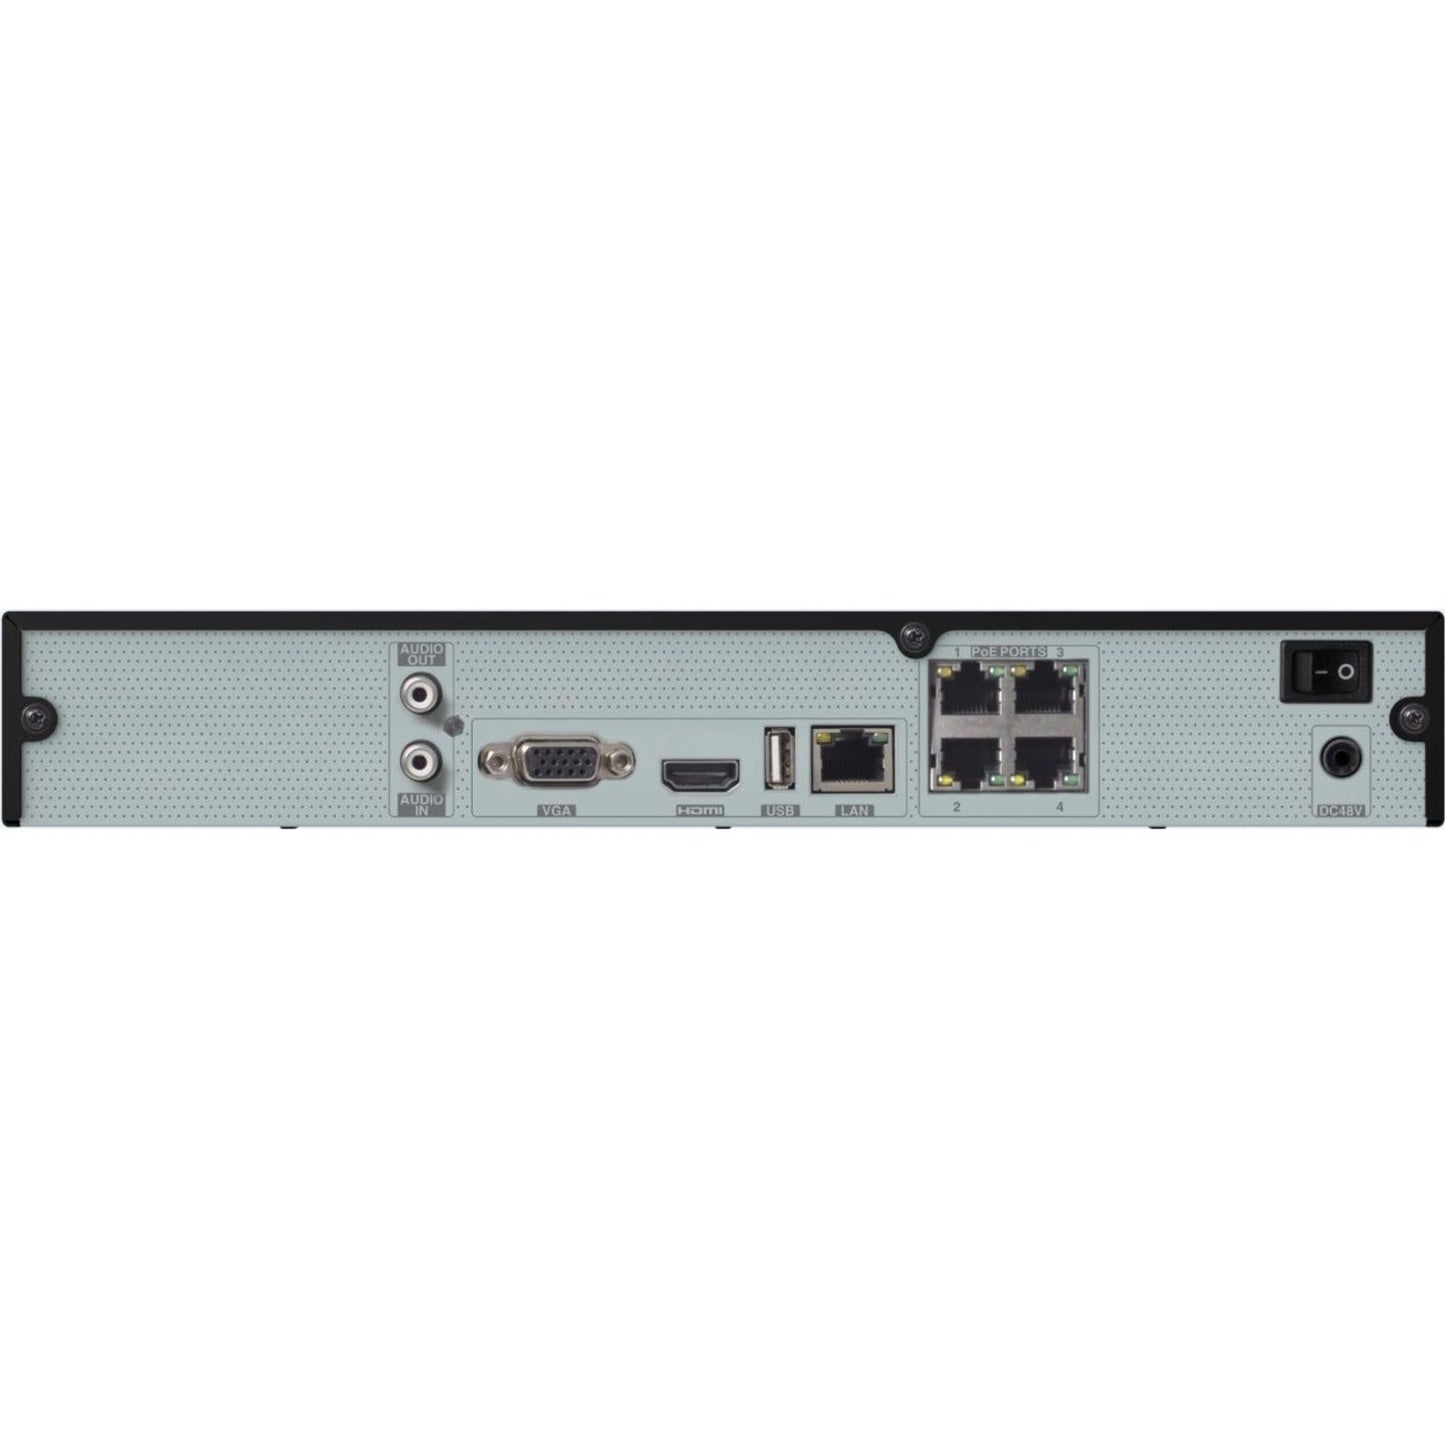 Speco 4 Channel NVR with 4 Built-In PoE Ports - 3 TB HDD